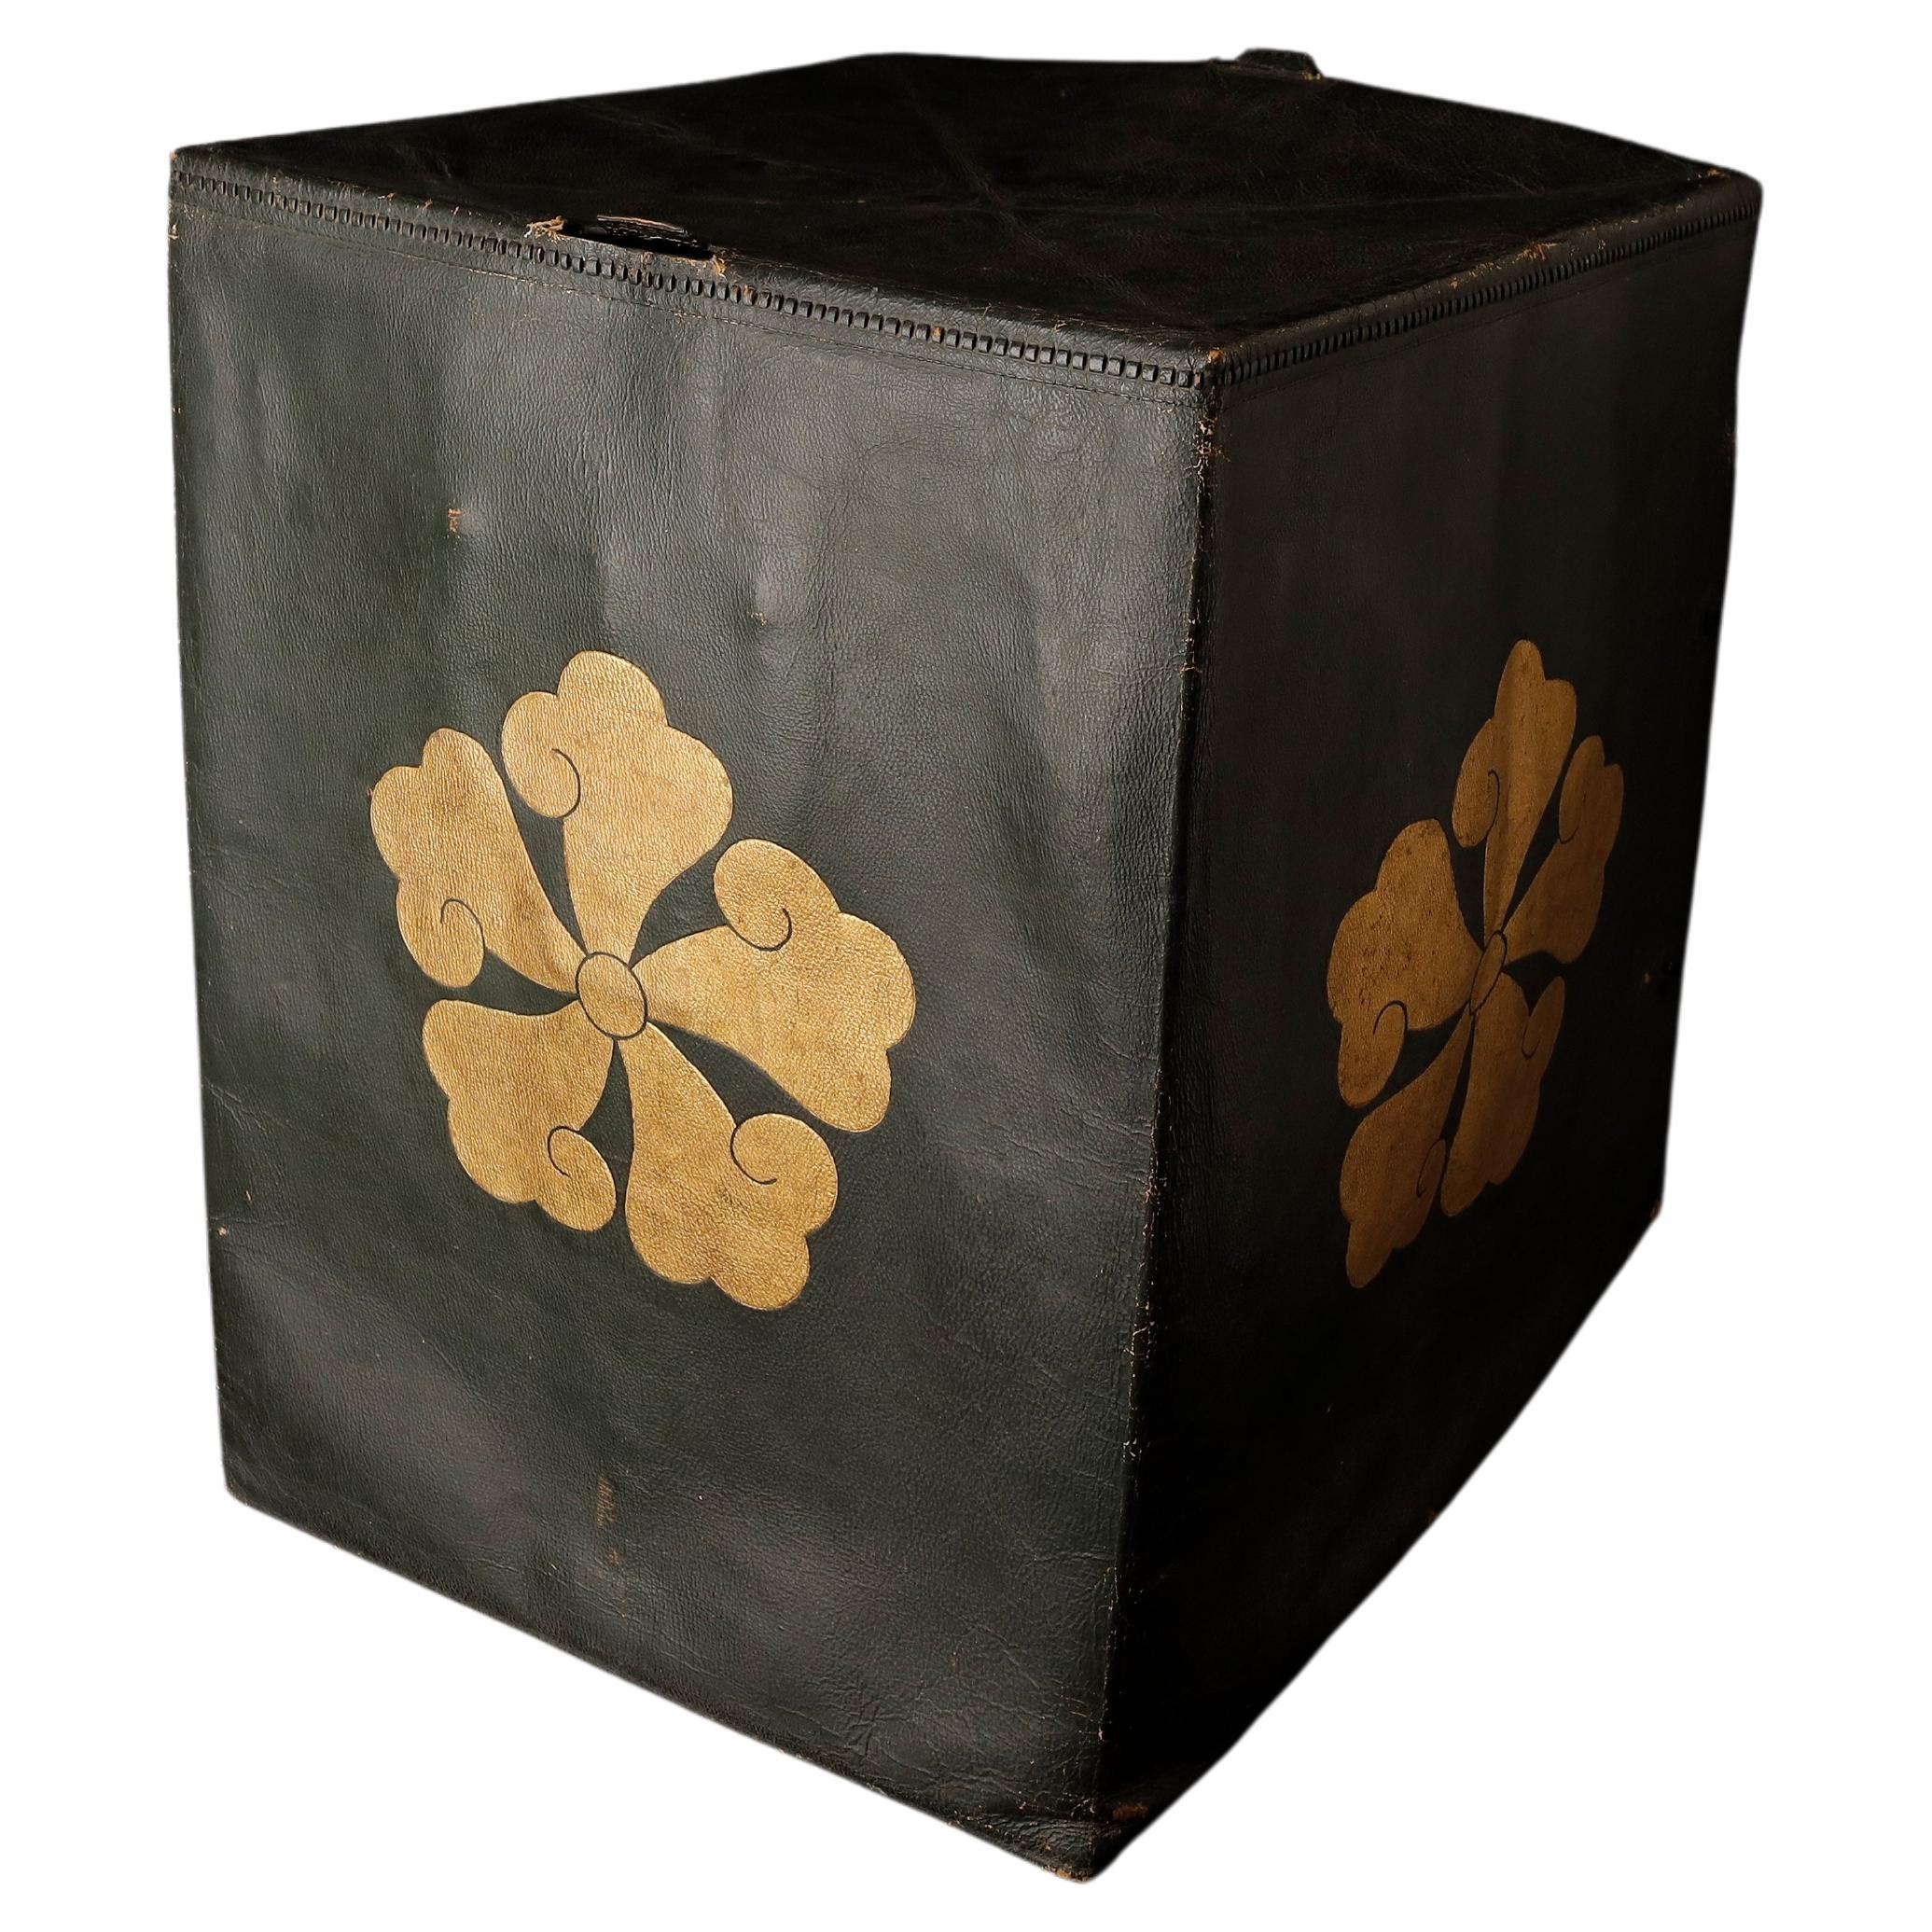 A Rare Leather Cover Decorated with Samurai Clan Crest

This rare leather cover is a stunning example of Japanese craftsmanship. It is dated to the Mid Edo period, circa 17-18th century, and is in very fine condition, with some losses and abrasions